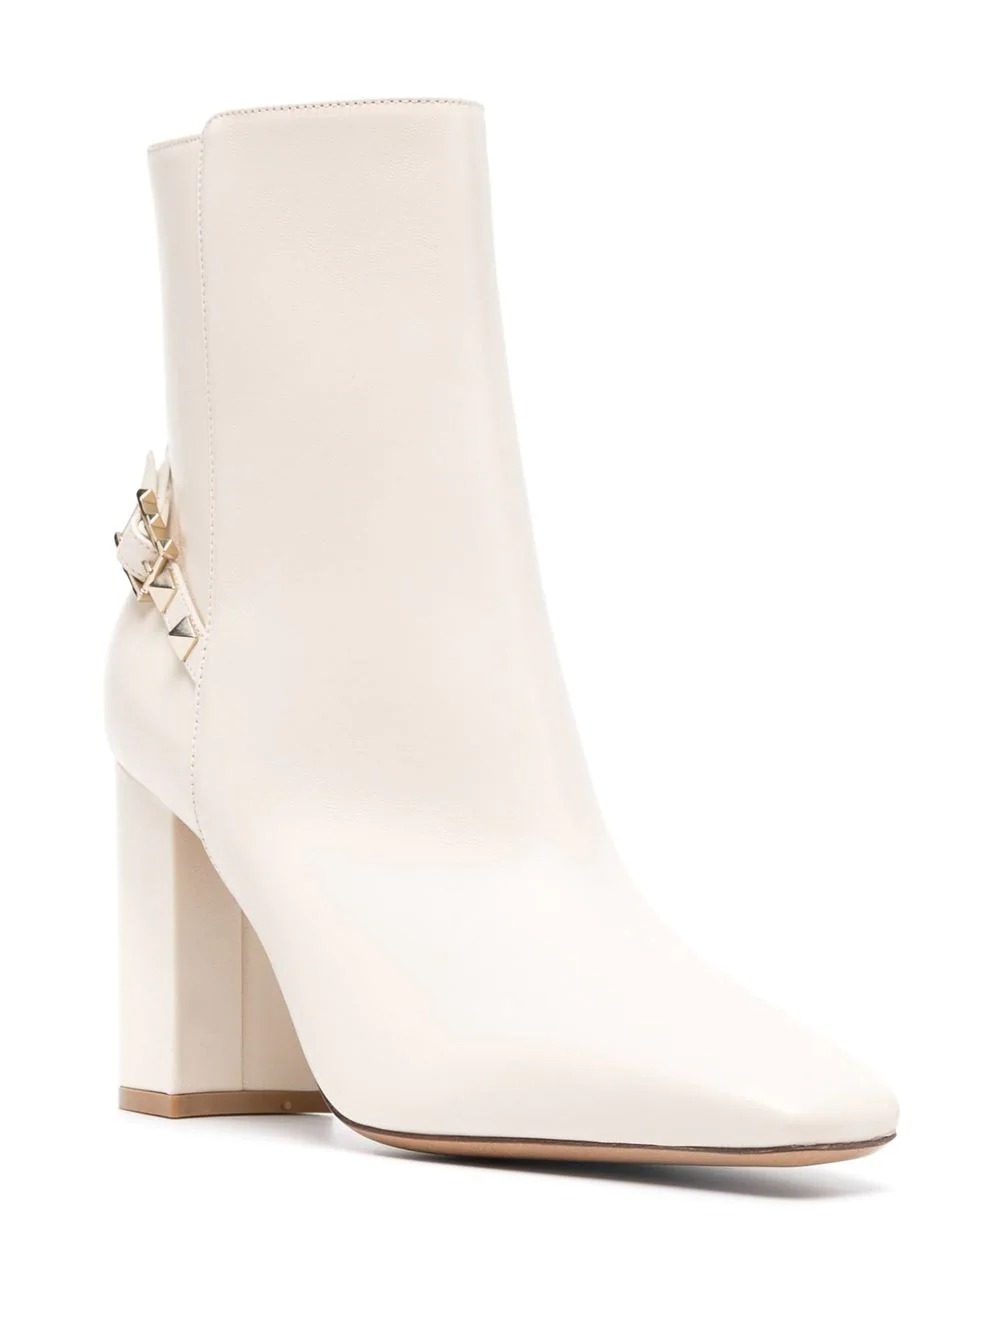 ivory boots for outdoor wedding